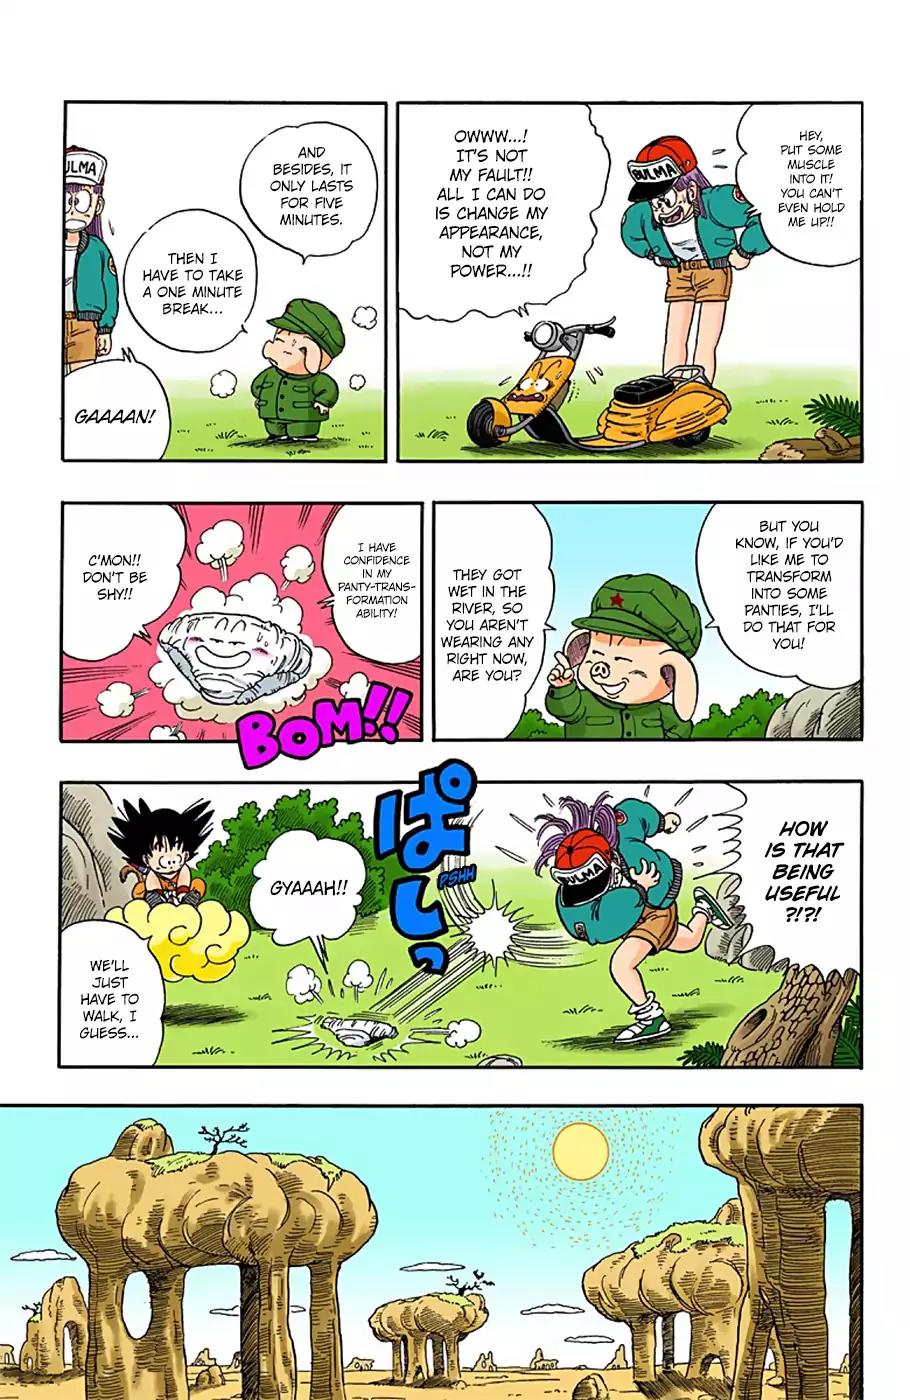 Dragon Ball - Full Color Vol.1 Chapter 7: